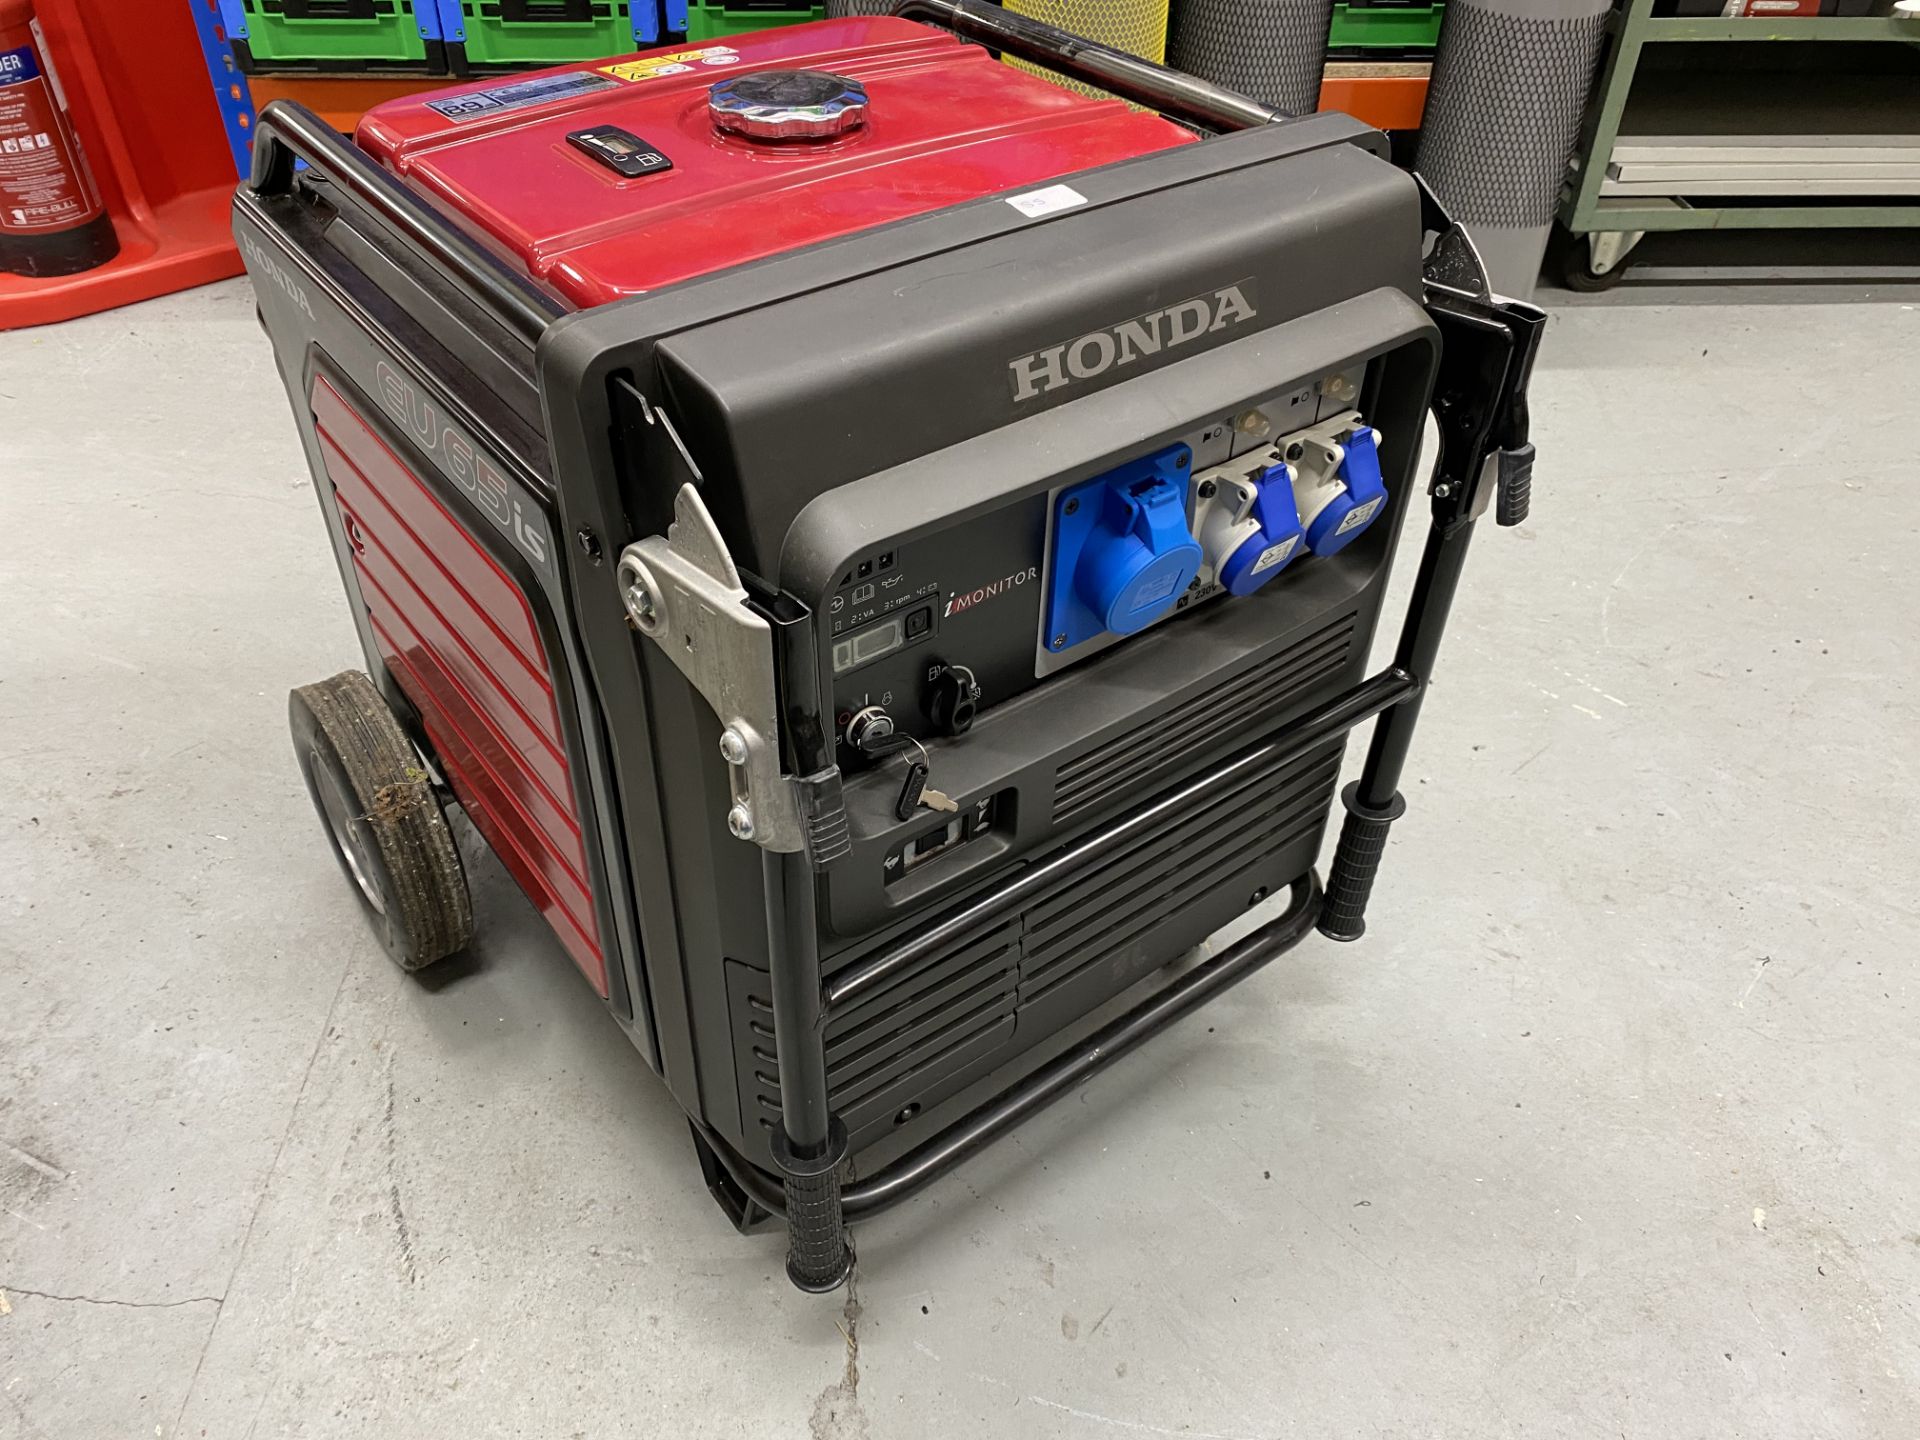 Honda EU65iS inverter mobile petrol generator, rated power 5.5kw, 230 volts, 23.9A, (2014).